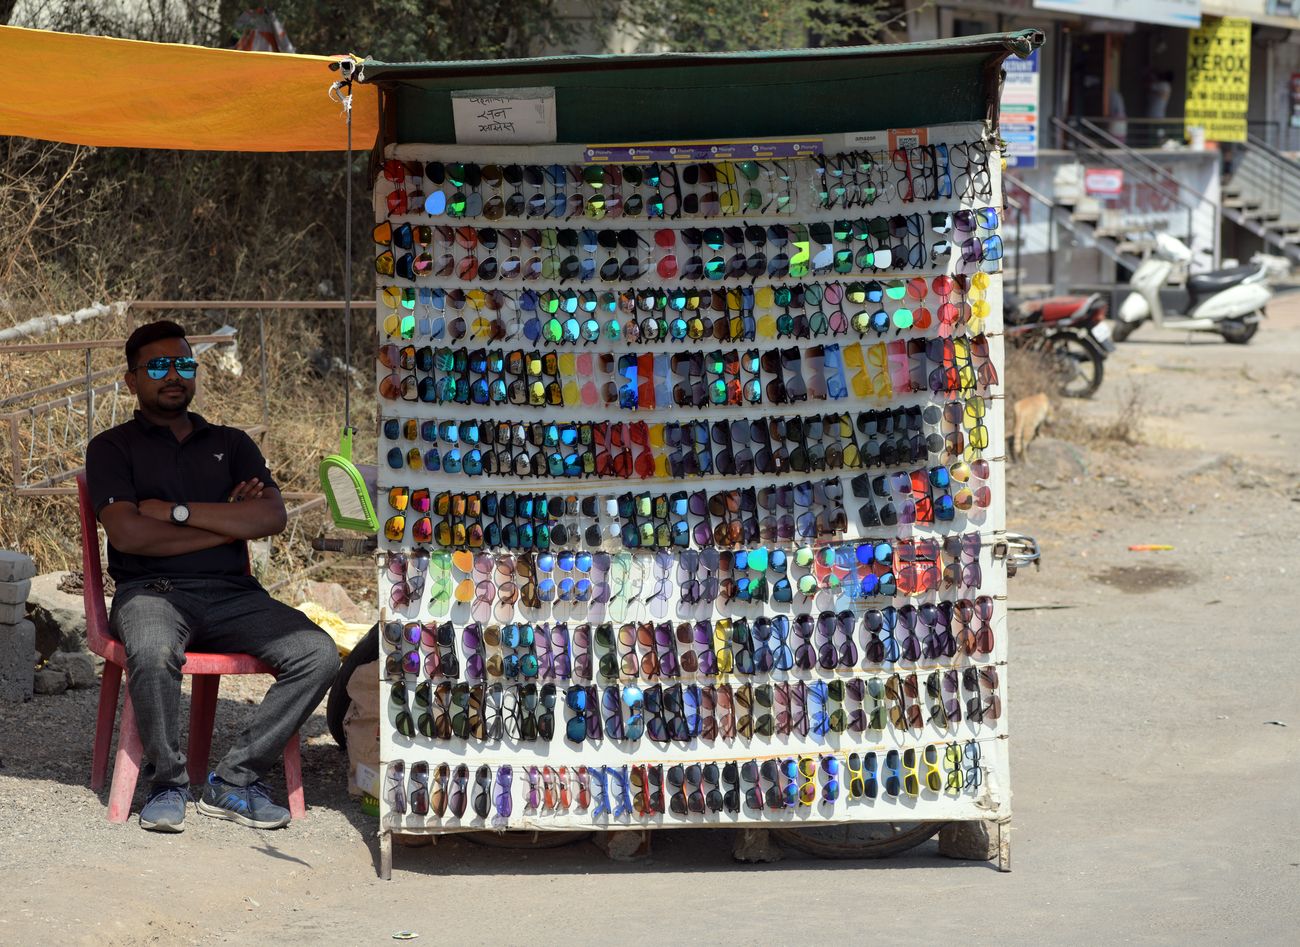 A man uses a pair of sunglasses from his roadside trading store to protect his eyes from the glare of the sun